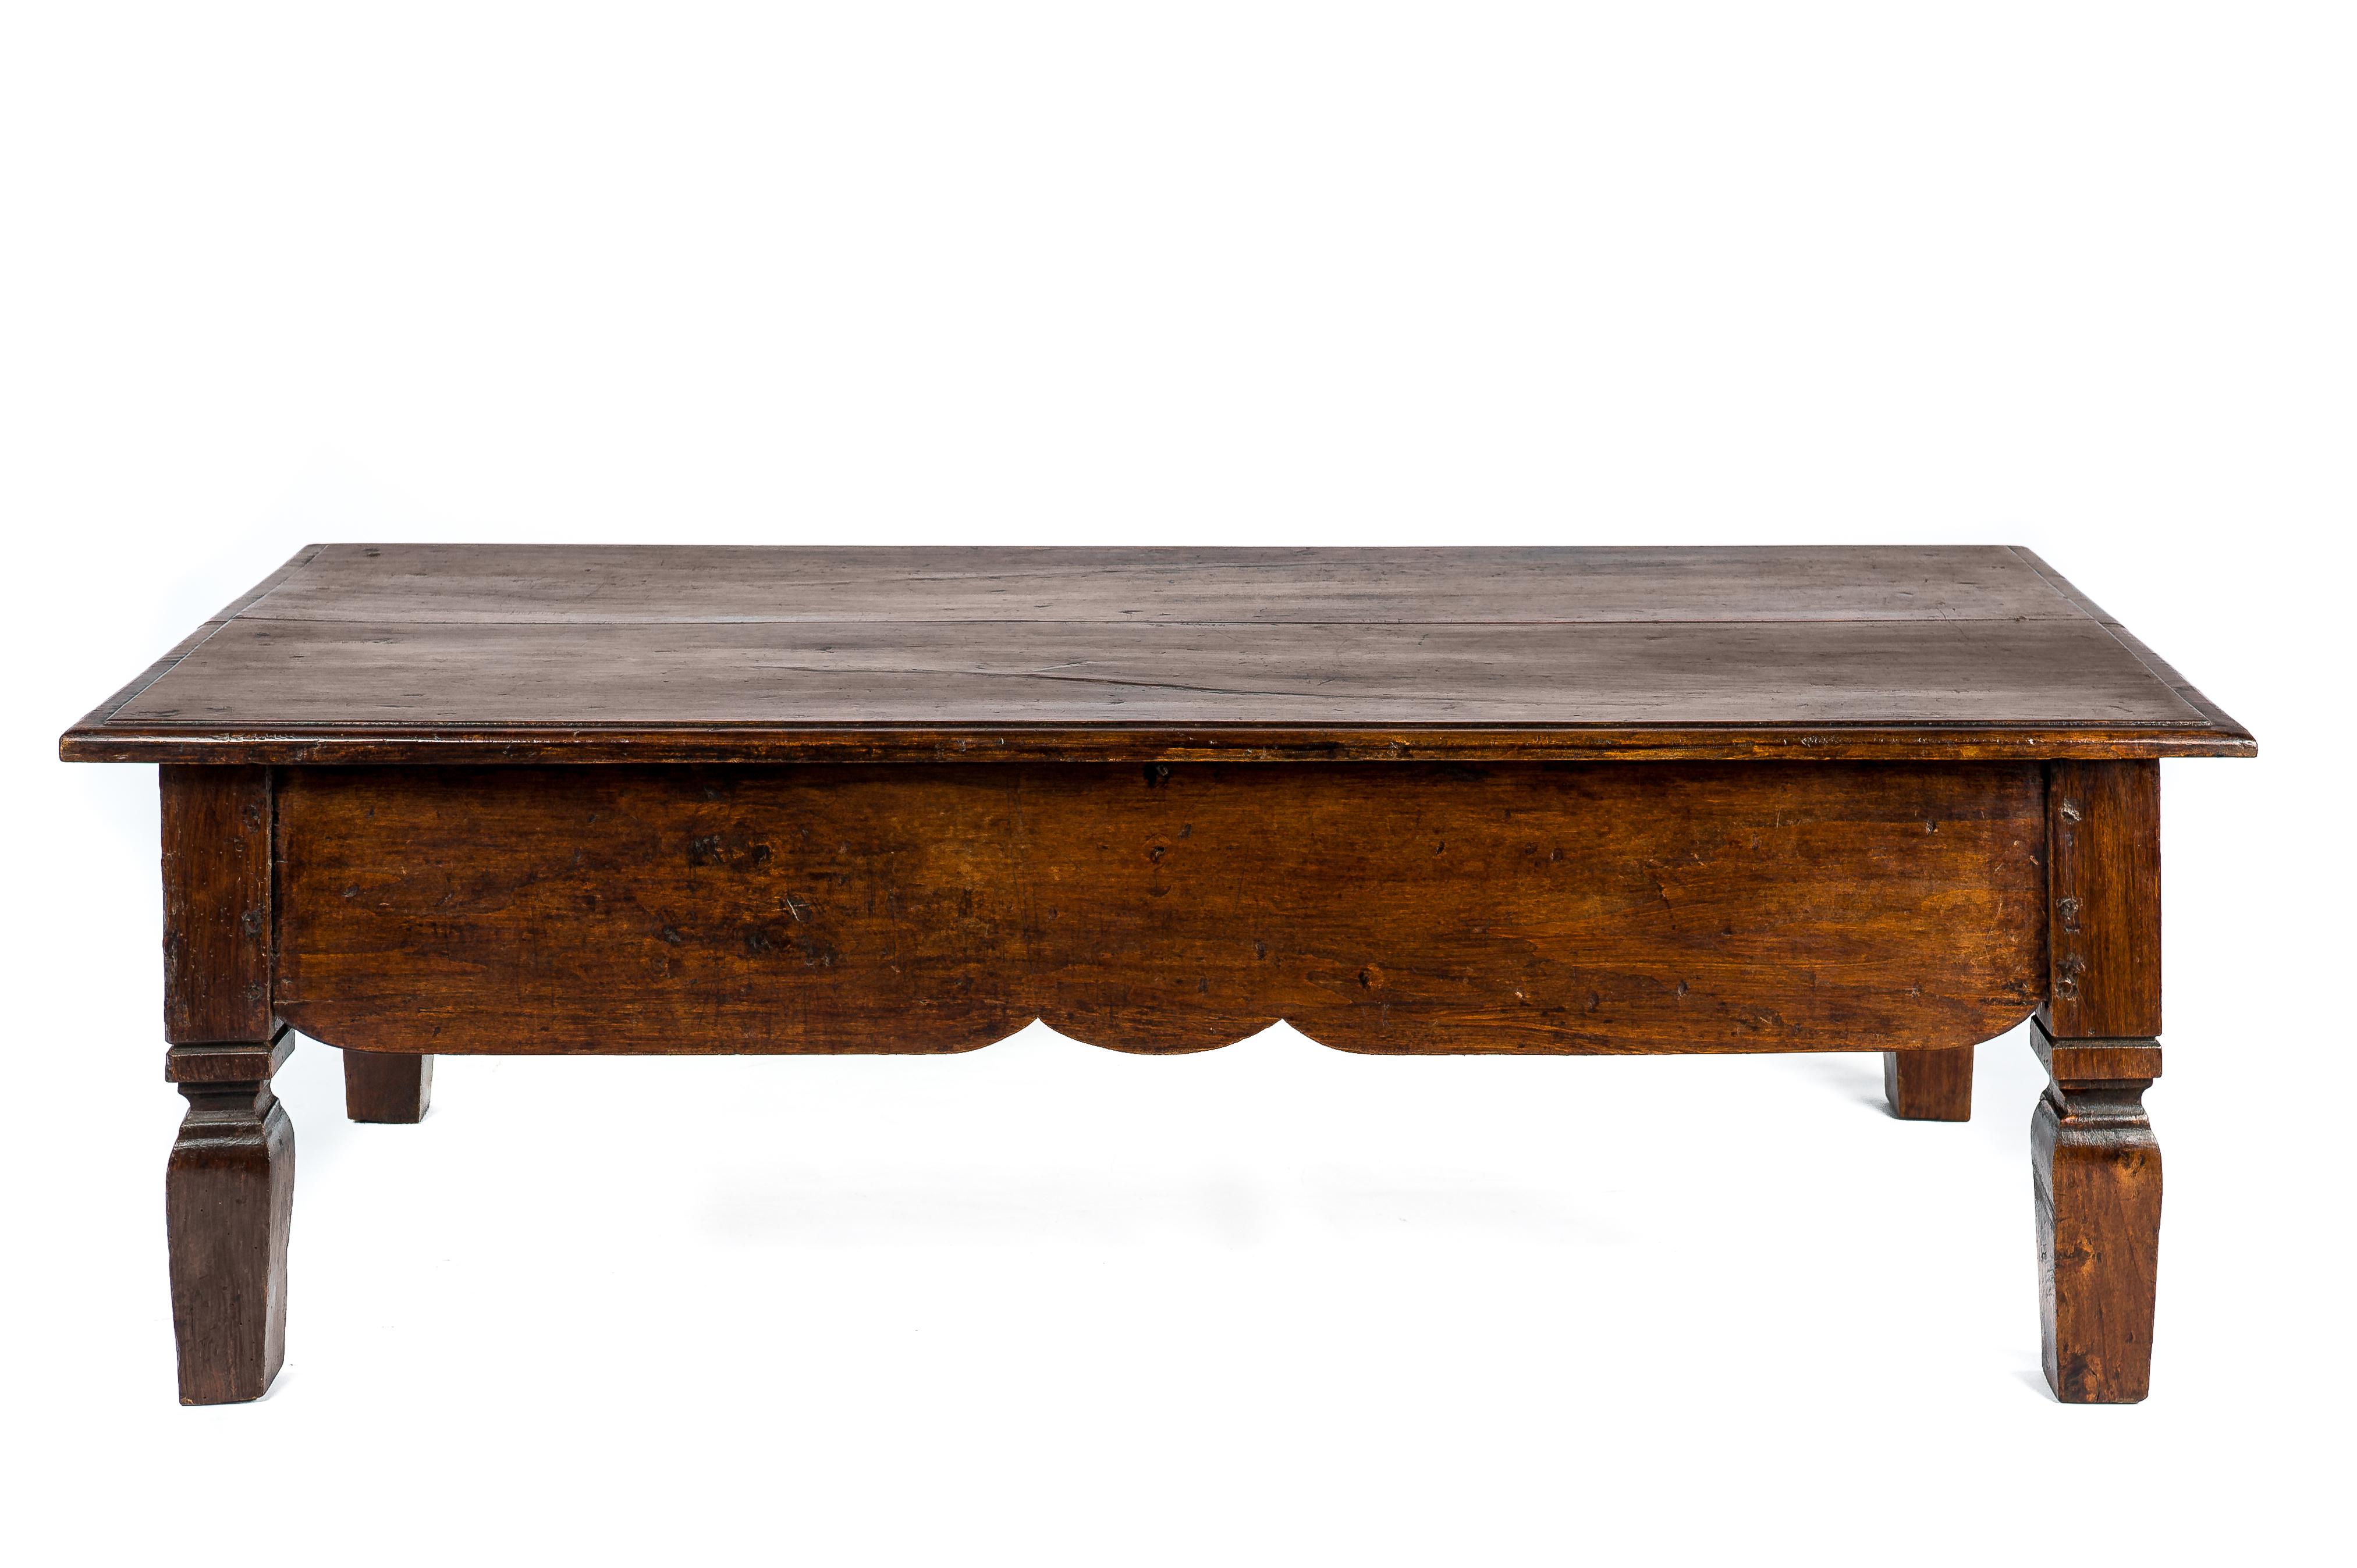 Polished Antique Mid 19th-Century Spanish Rural Warm Brown Solid Elm Coffee Table